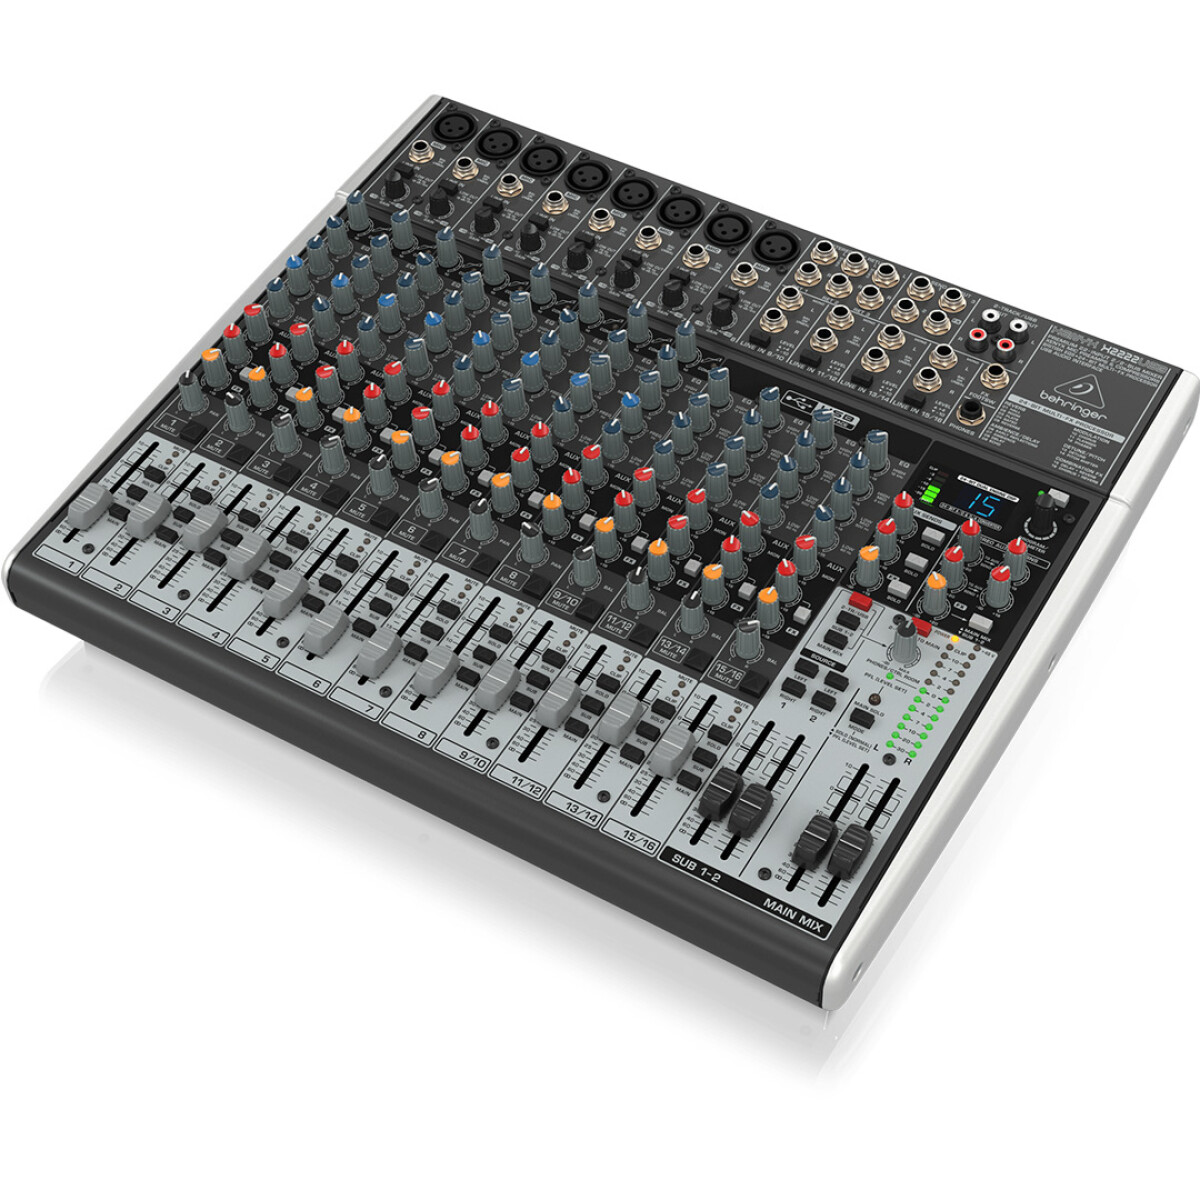 Consola Behringer X2222usb 22in 2 2 Bus Fx 